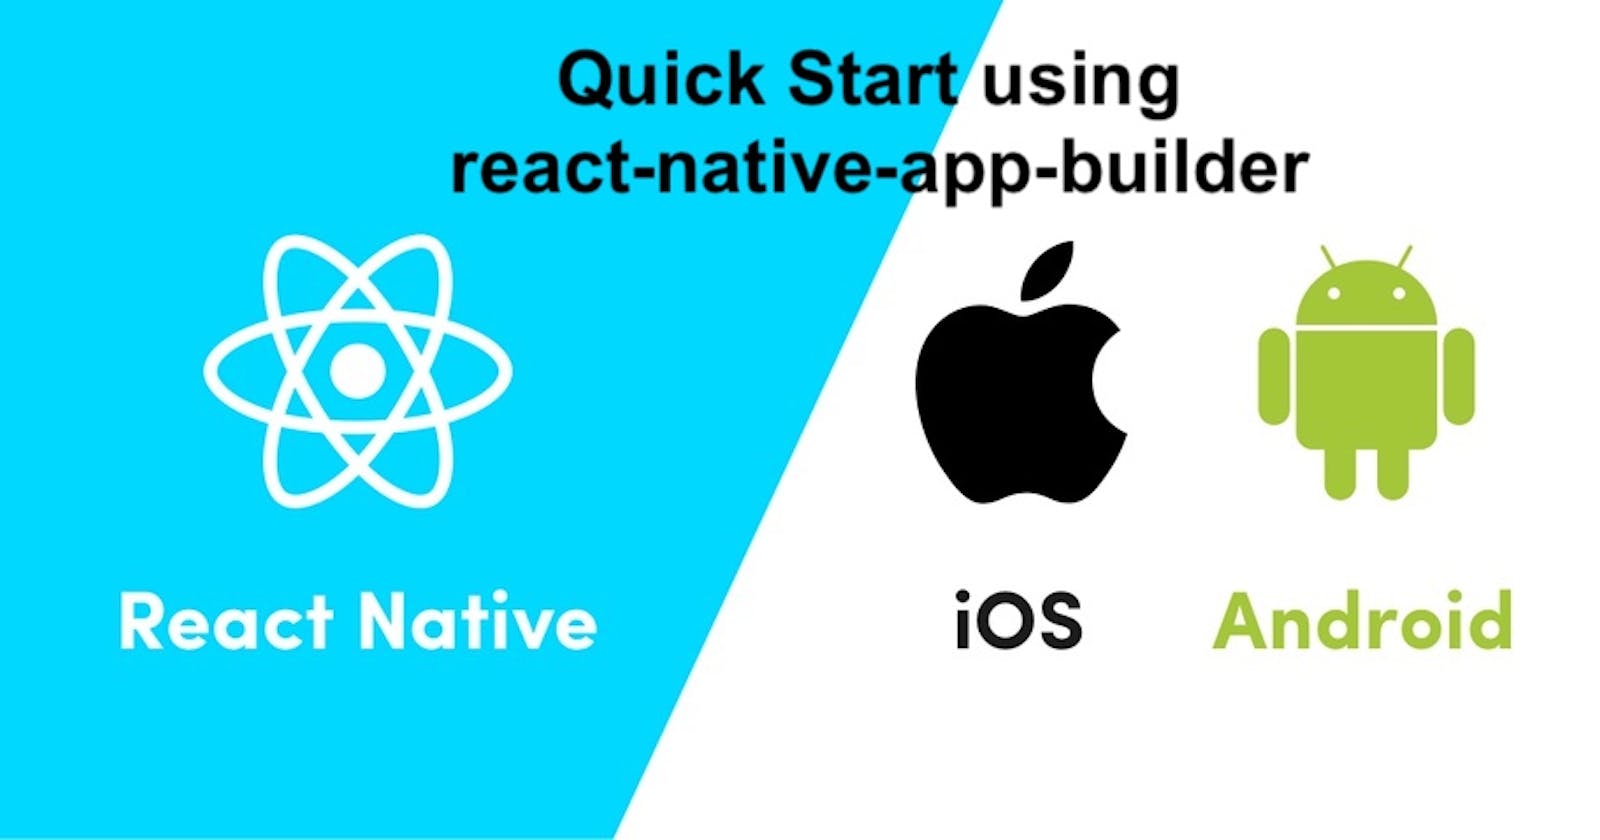 React Native — Application architecture with Design pattern using react-native-app-builder NPM